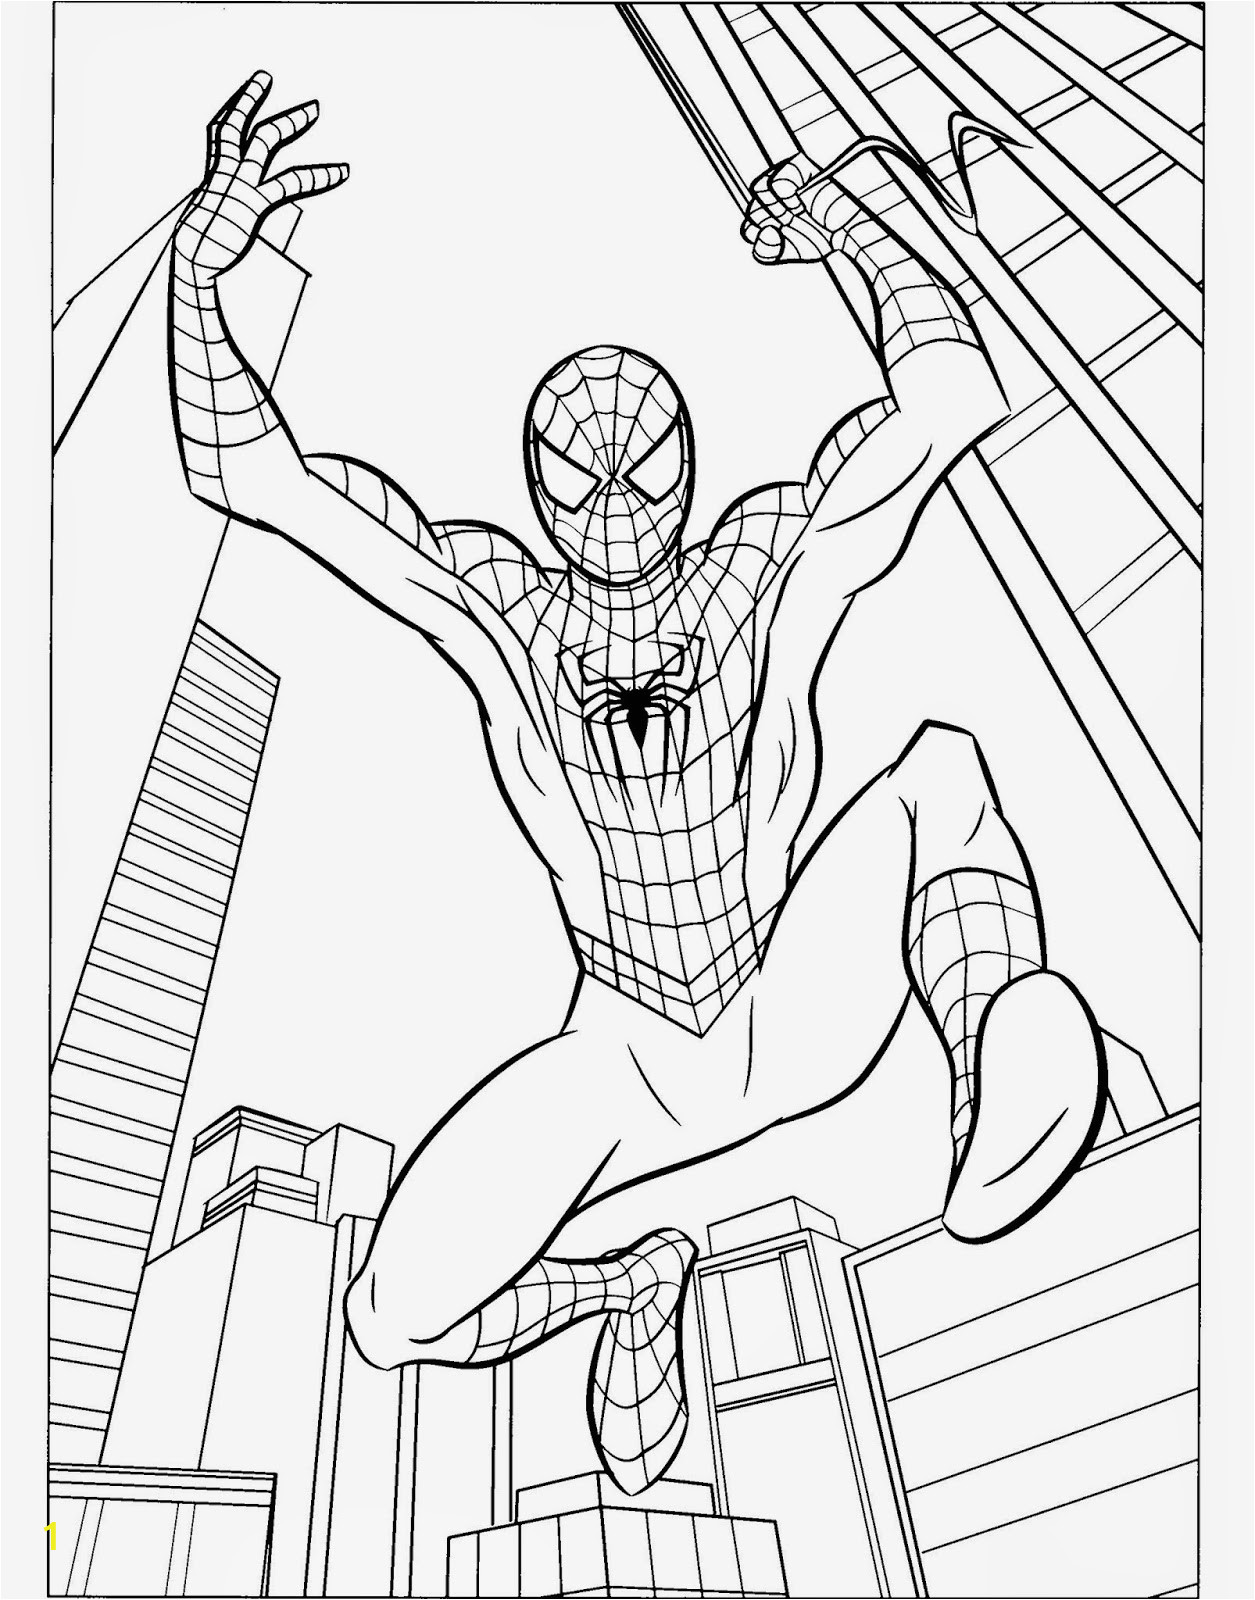 The Amazing Spiderman Printable Coloring Pages Coloring Pages Spiderman Free Printable Coloring Pages